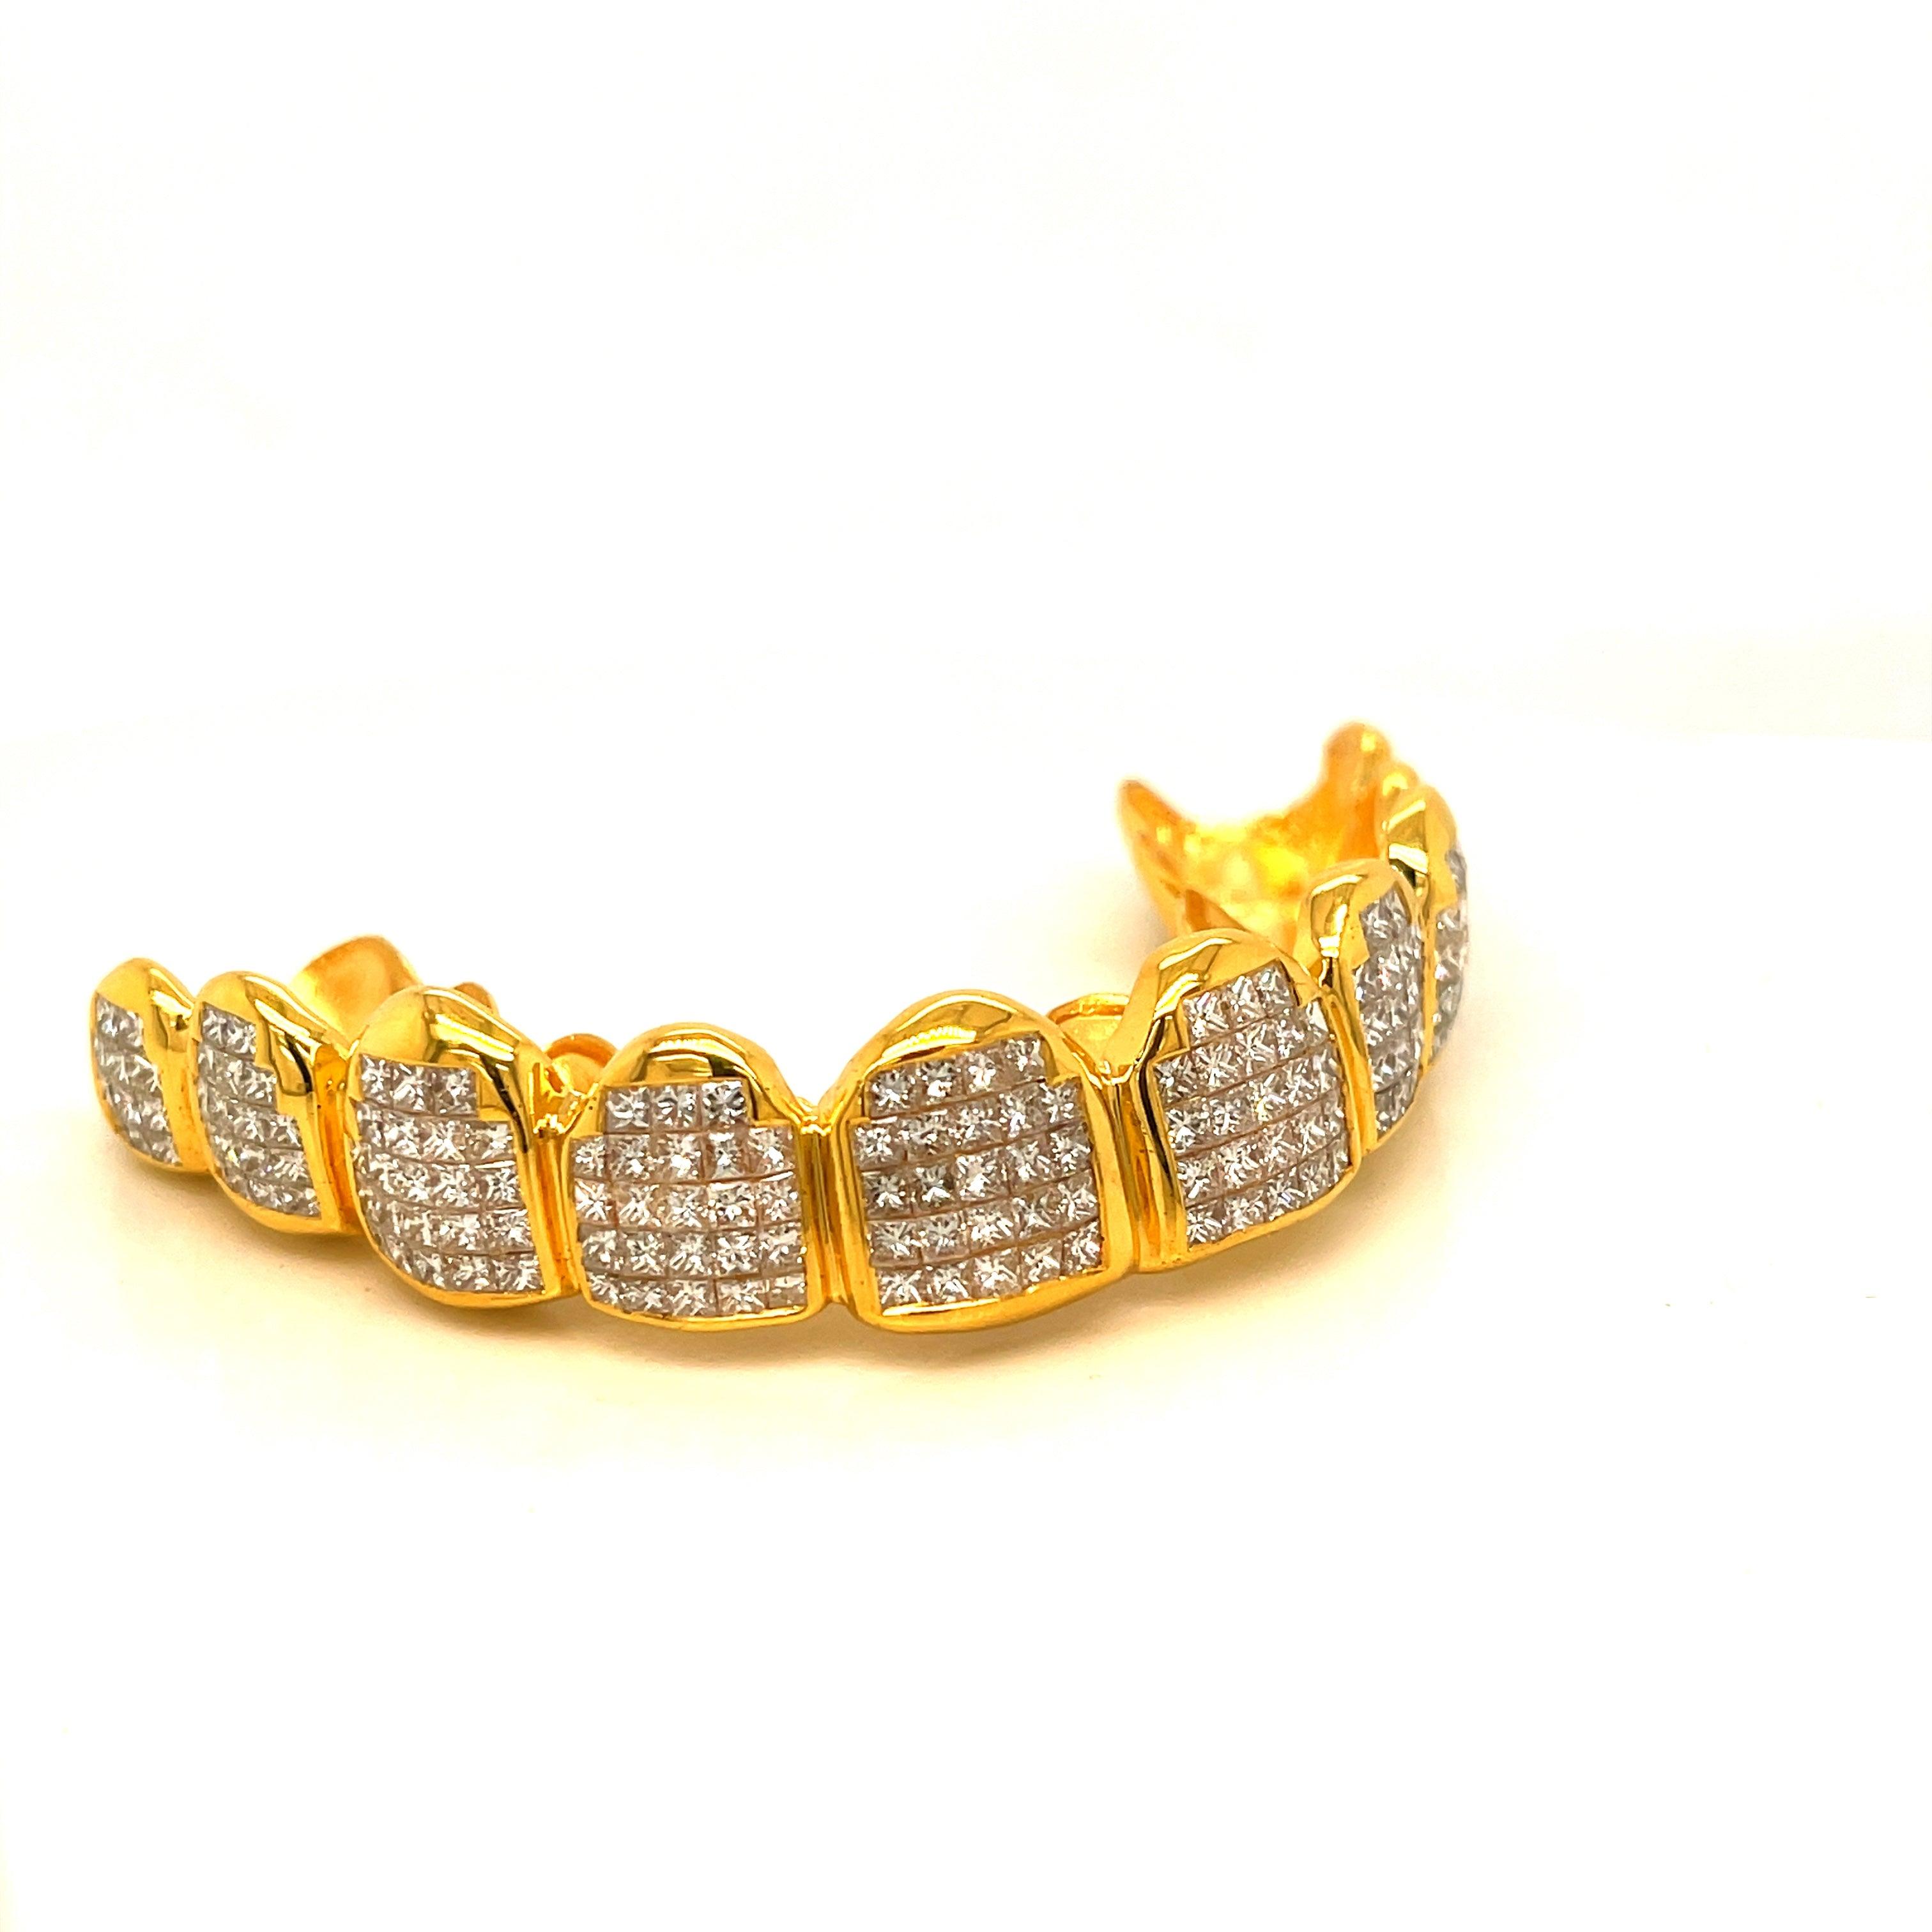 10pc 18k Gold Invisible Set Top Grillz - Seattle Gold Grillz